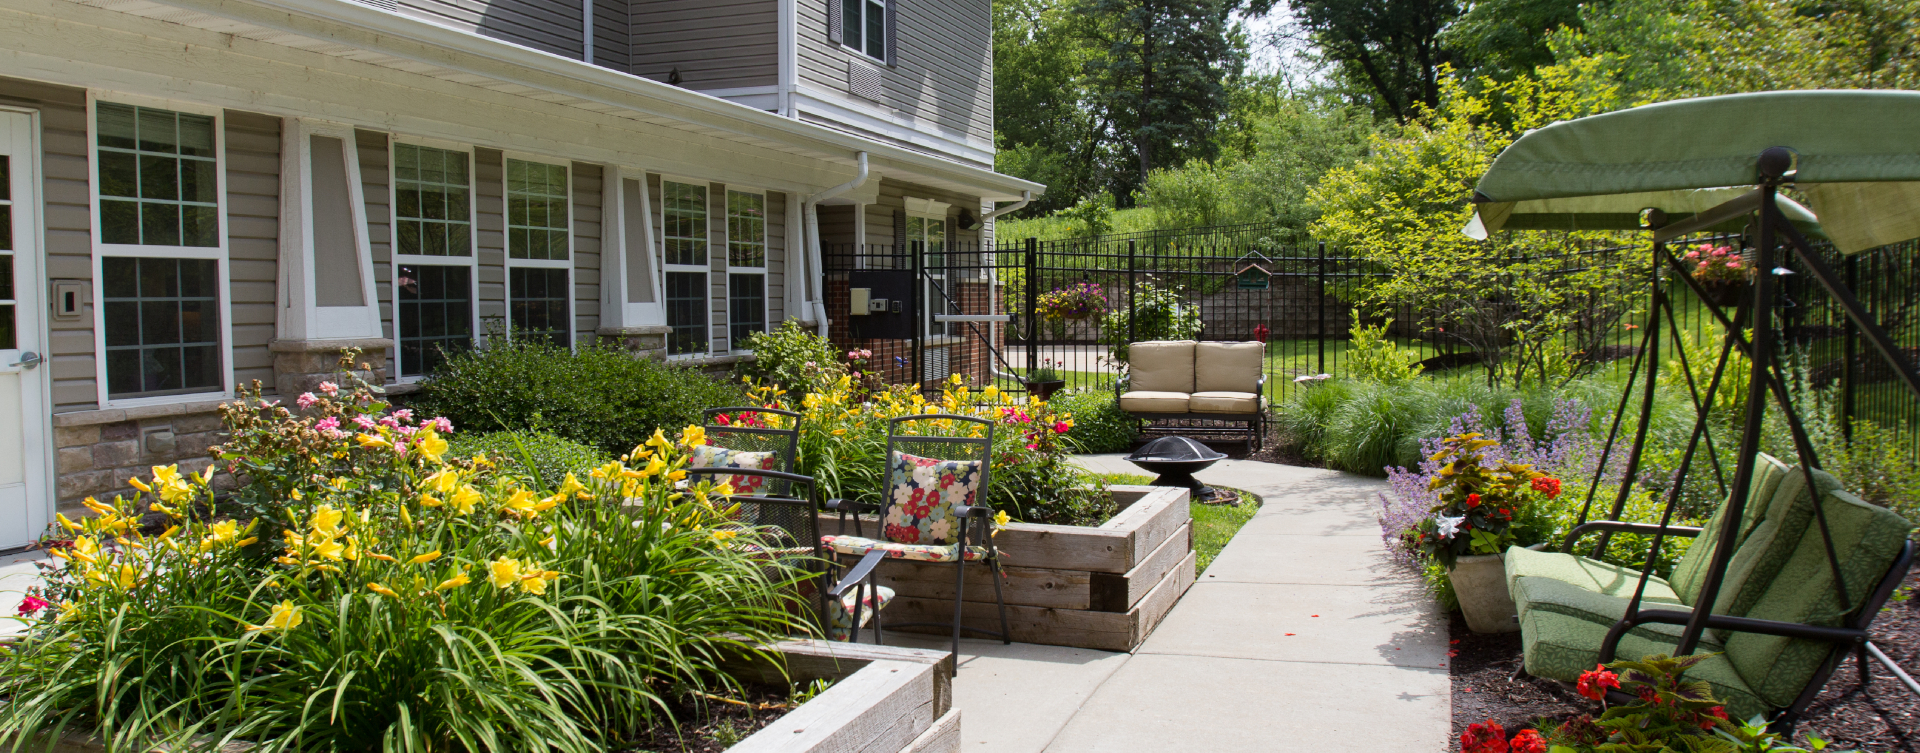 Residents with dementia can enjoy a traveling path, relaxed seating and raised garden beds in the courtyard at Bickford of St. Charles